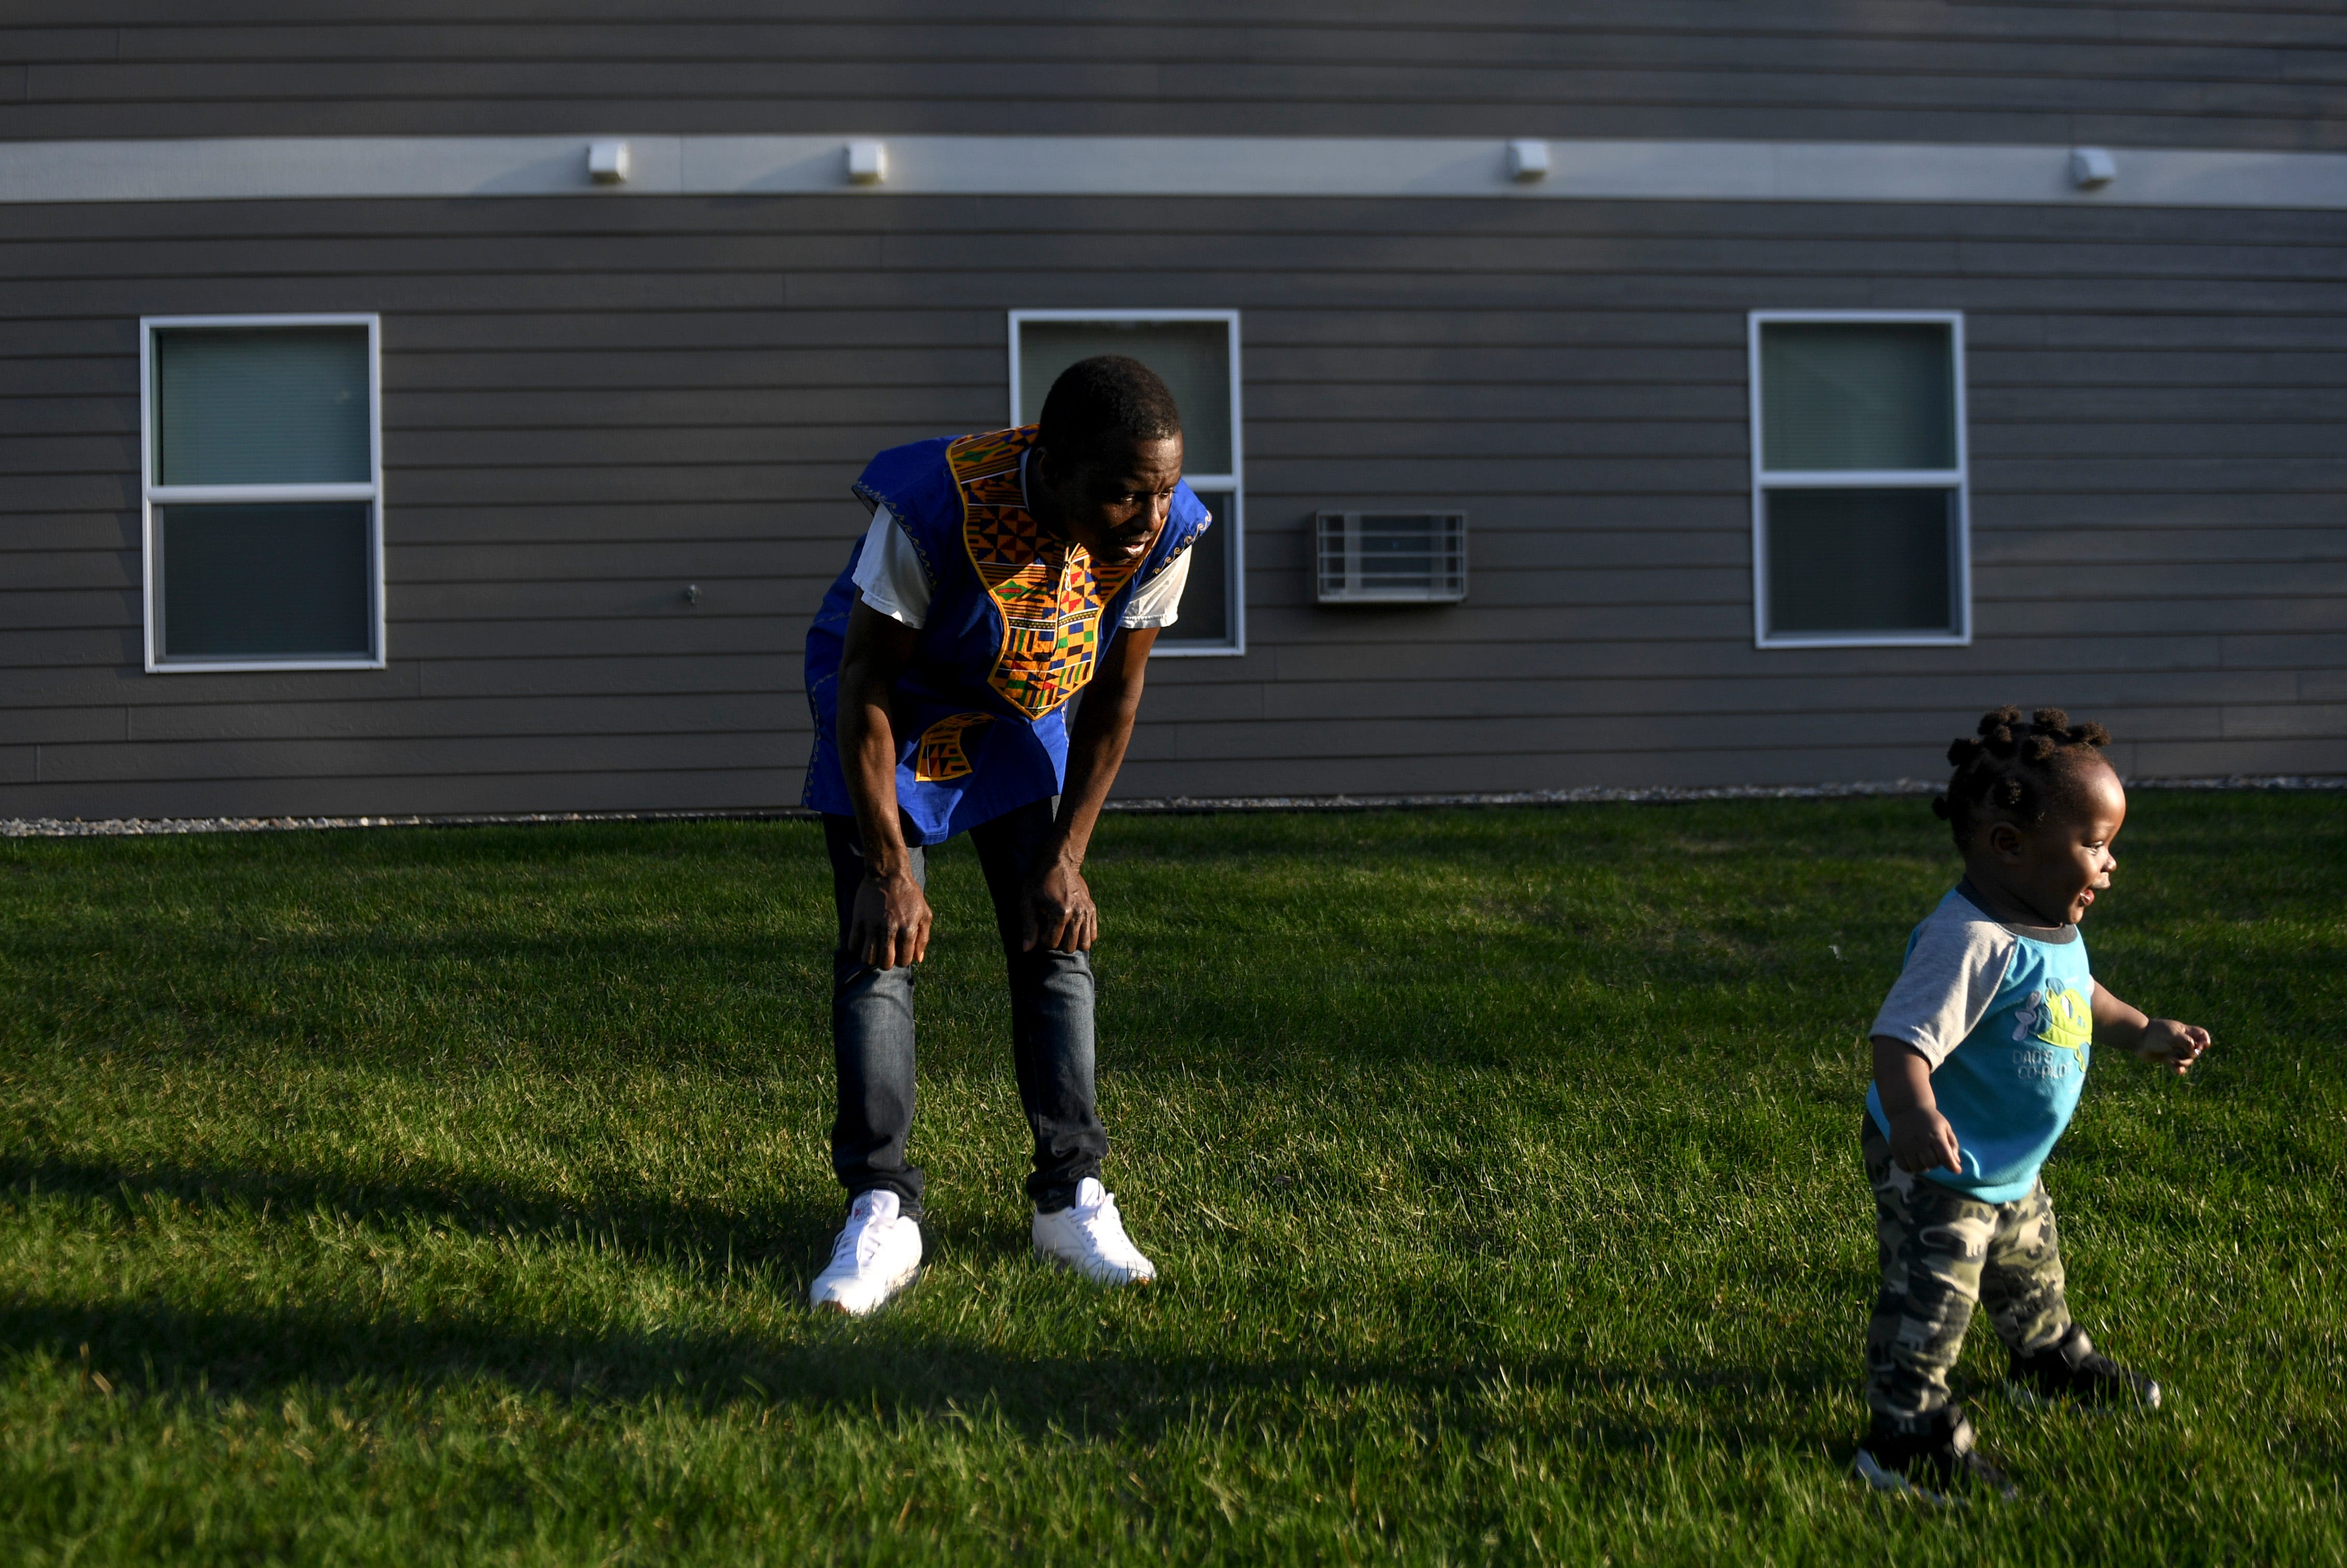 John Deranamie spends time with his youngest son, Nehemiah Deranamie, 1, on Wednesday, April 29, 2020 at his home in Sioux Falls, S.D. Deranamie, a Smithfield Foods employee, tested positive for COVID-19 and has been spending time at home with family since the meatpacking plant shut down.